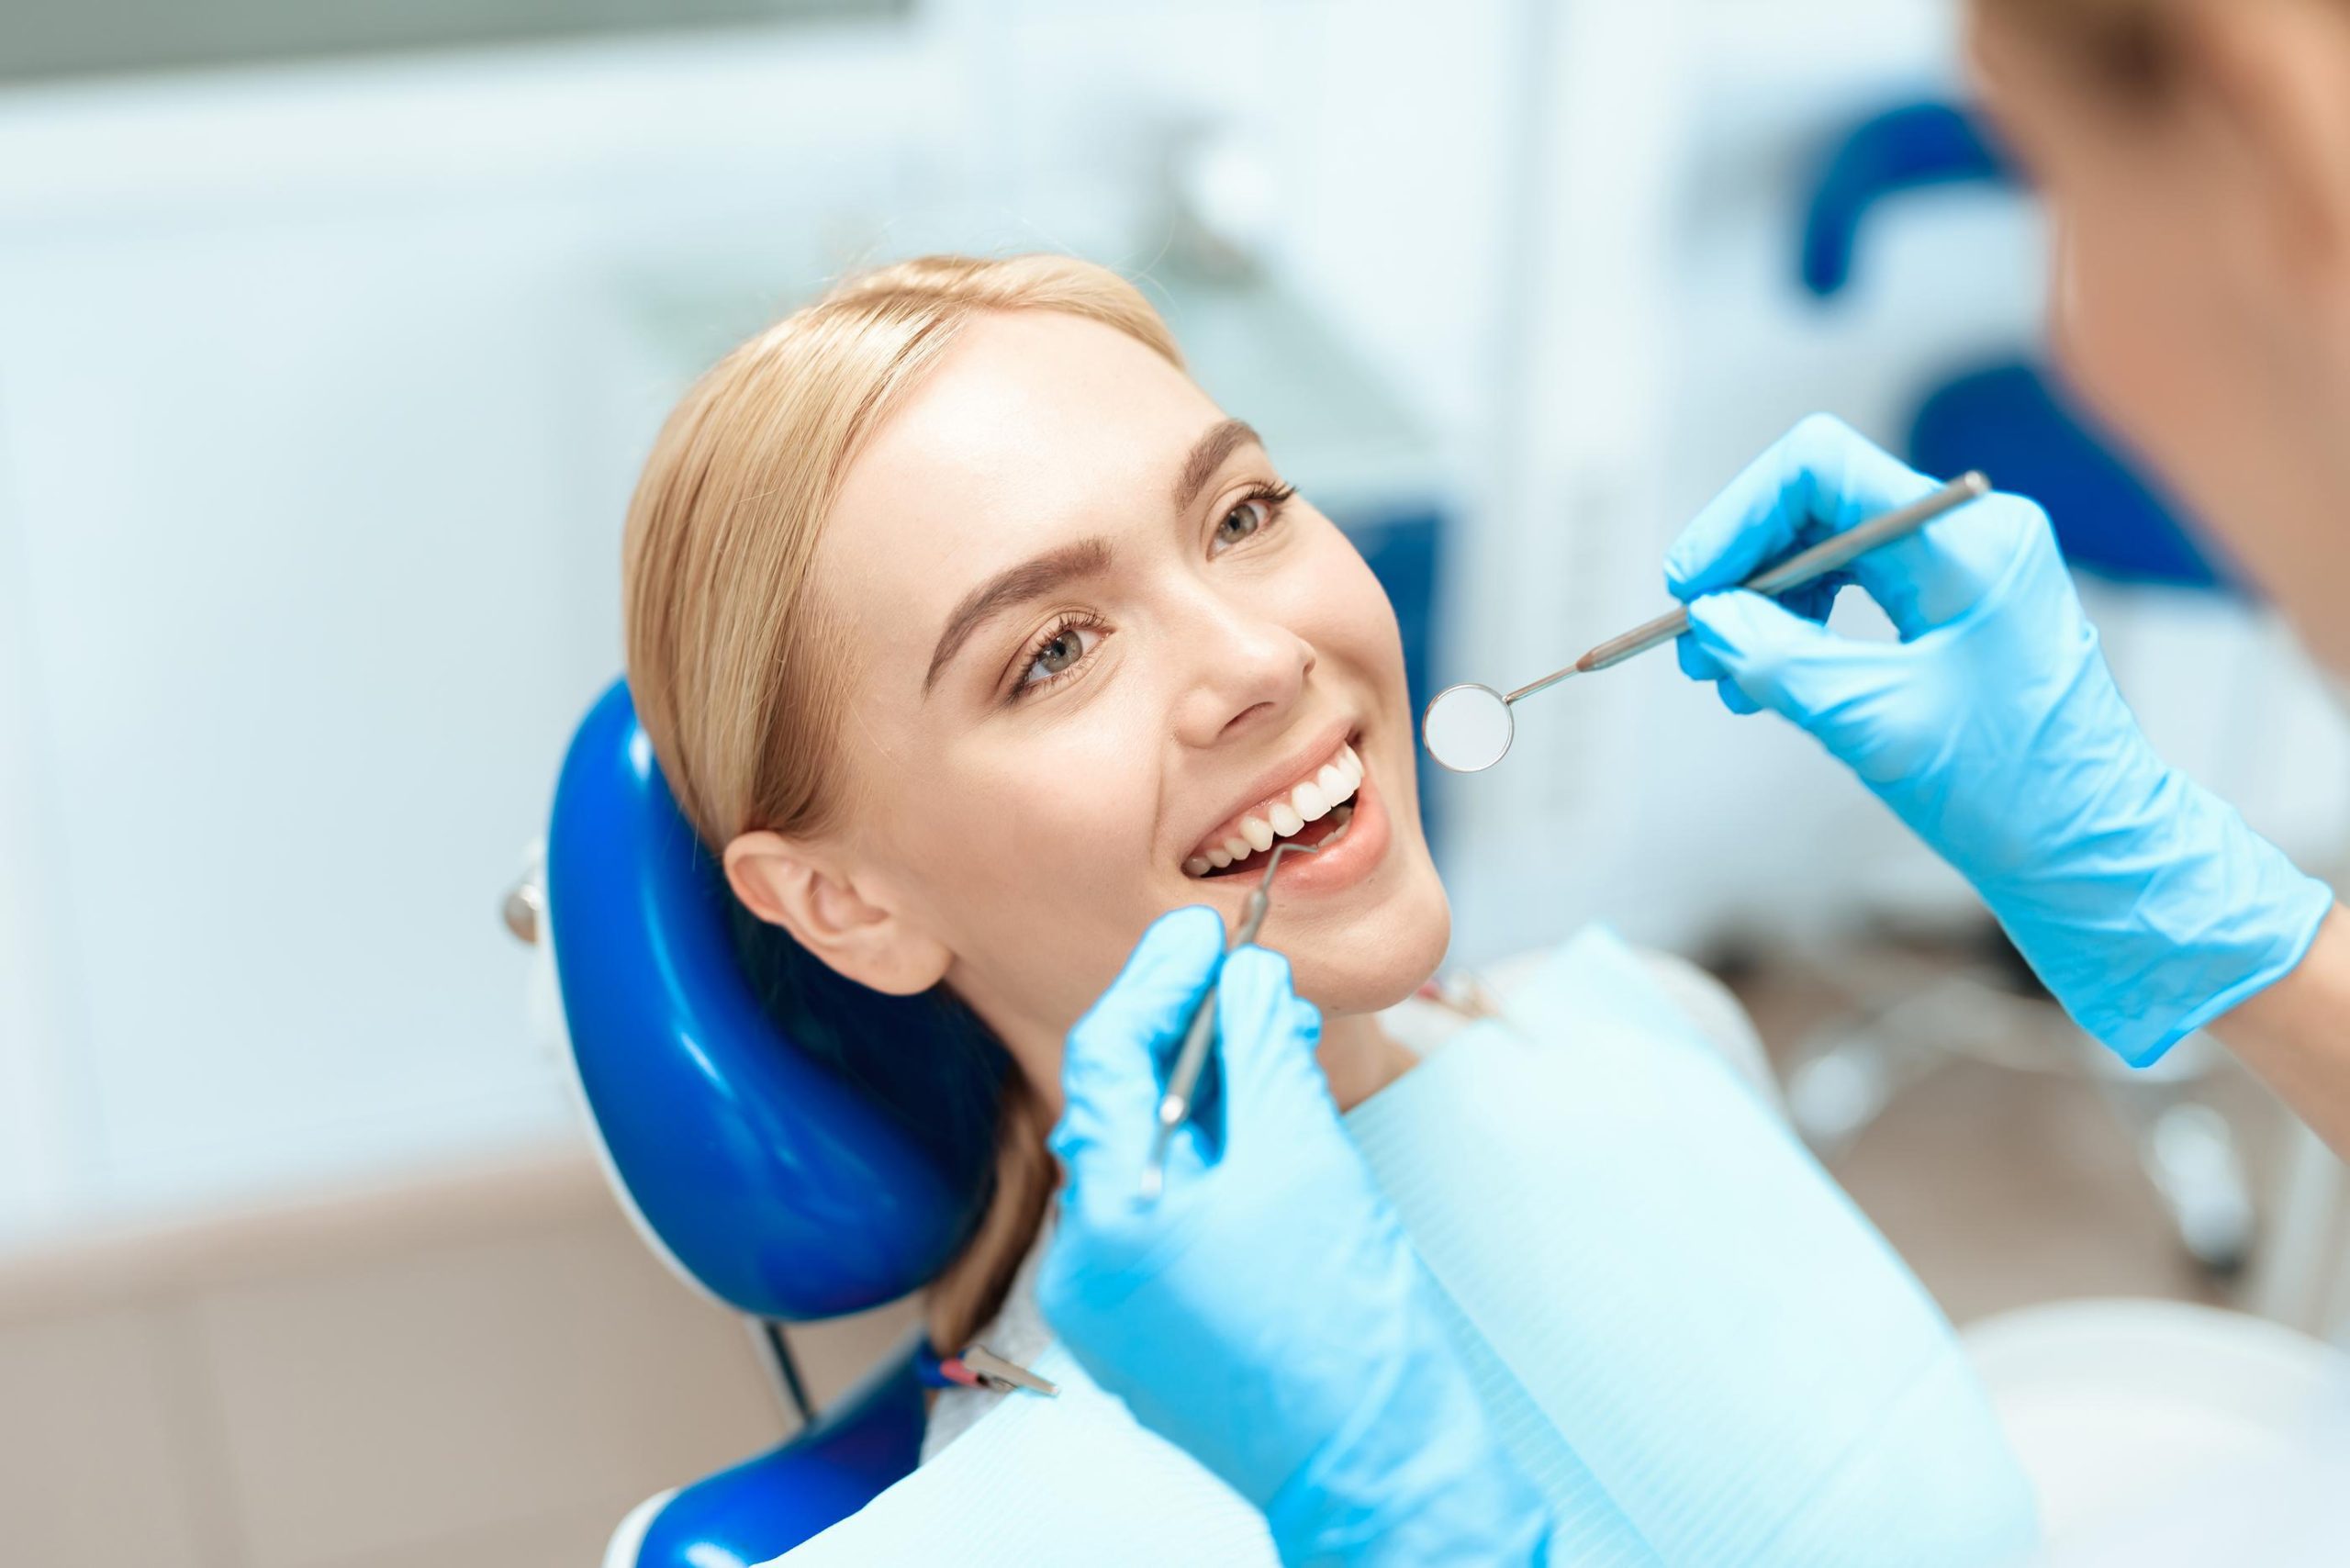 Let 24 Hour Dentist Be Your Trusted Dental & Oral Care in Tulsa